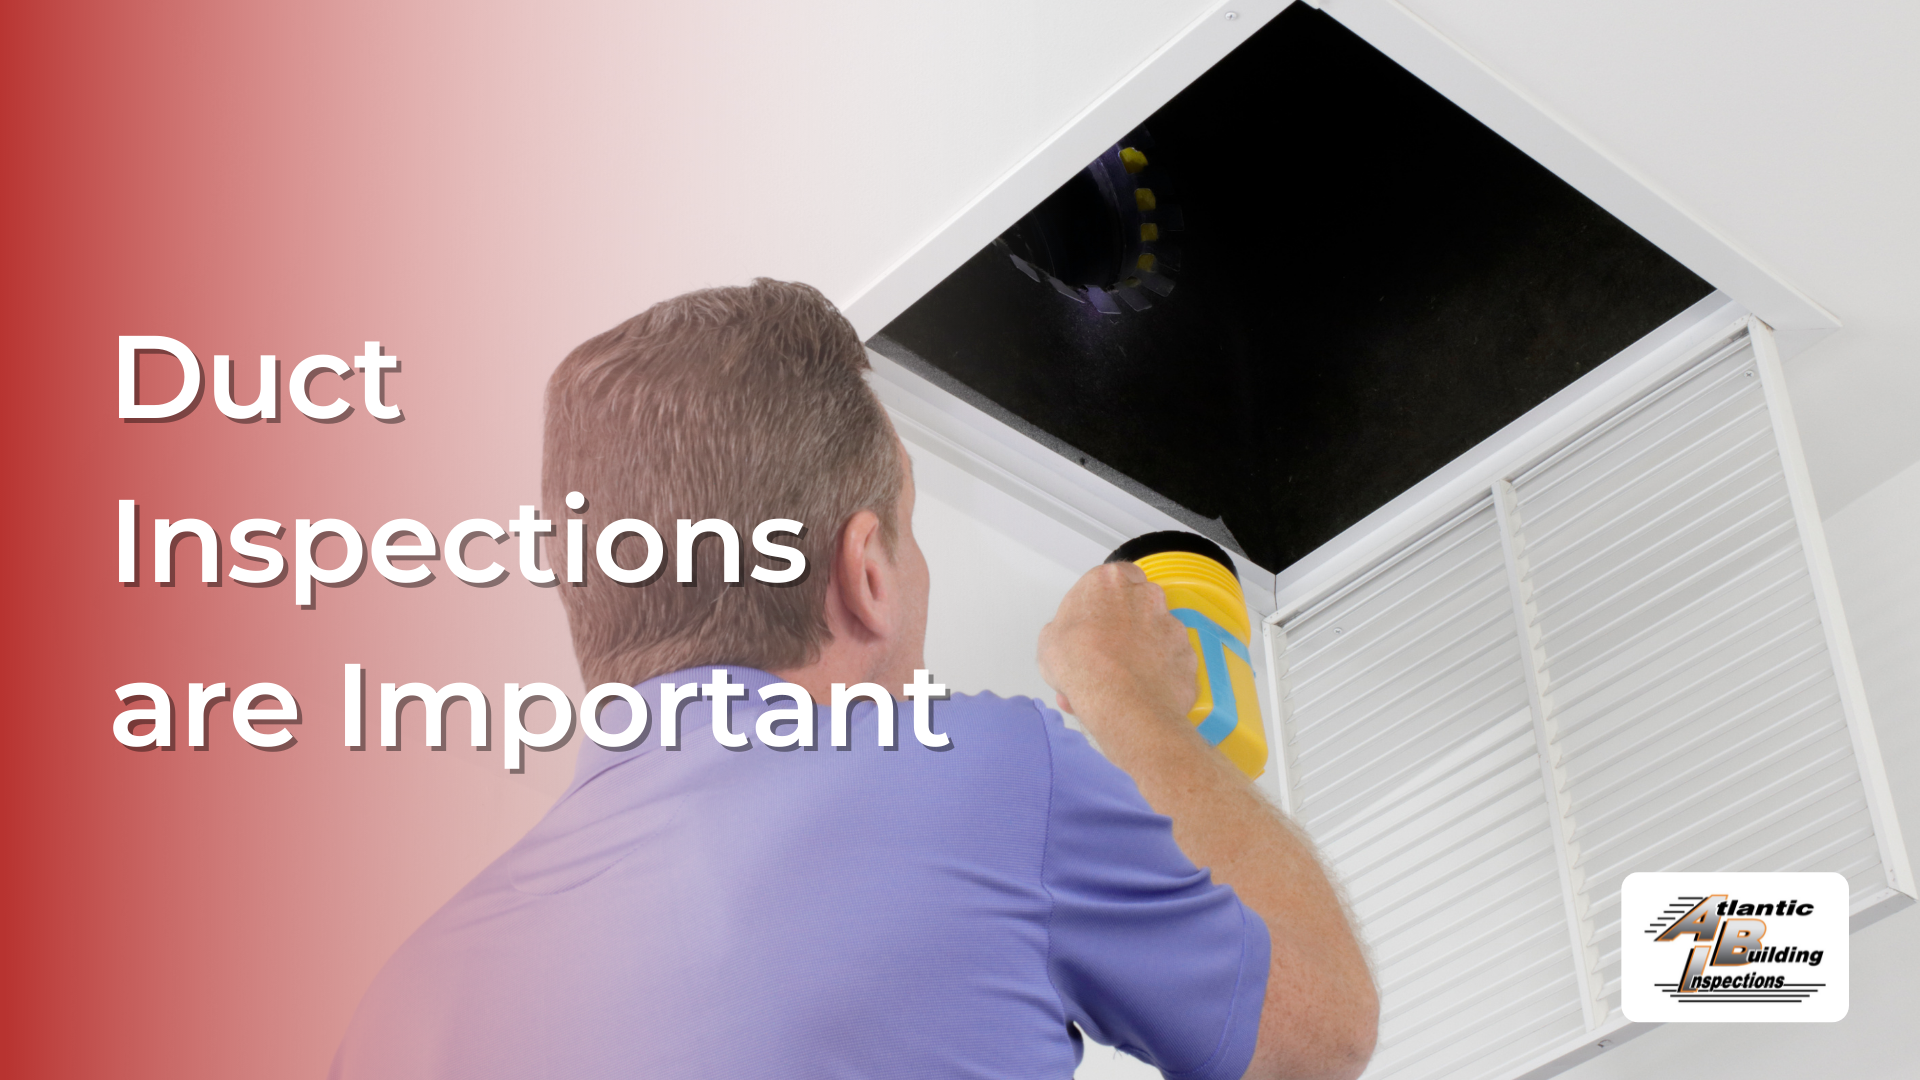 Why is Performing Duct Inspections Important?